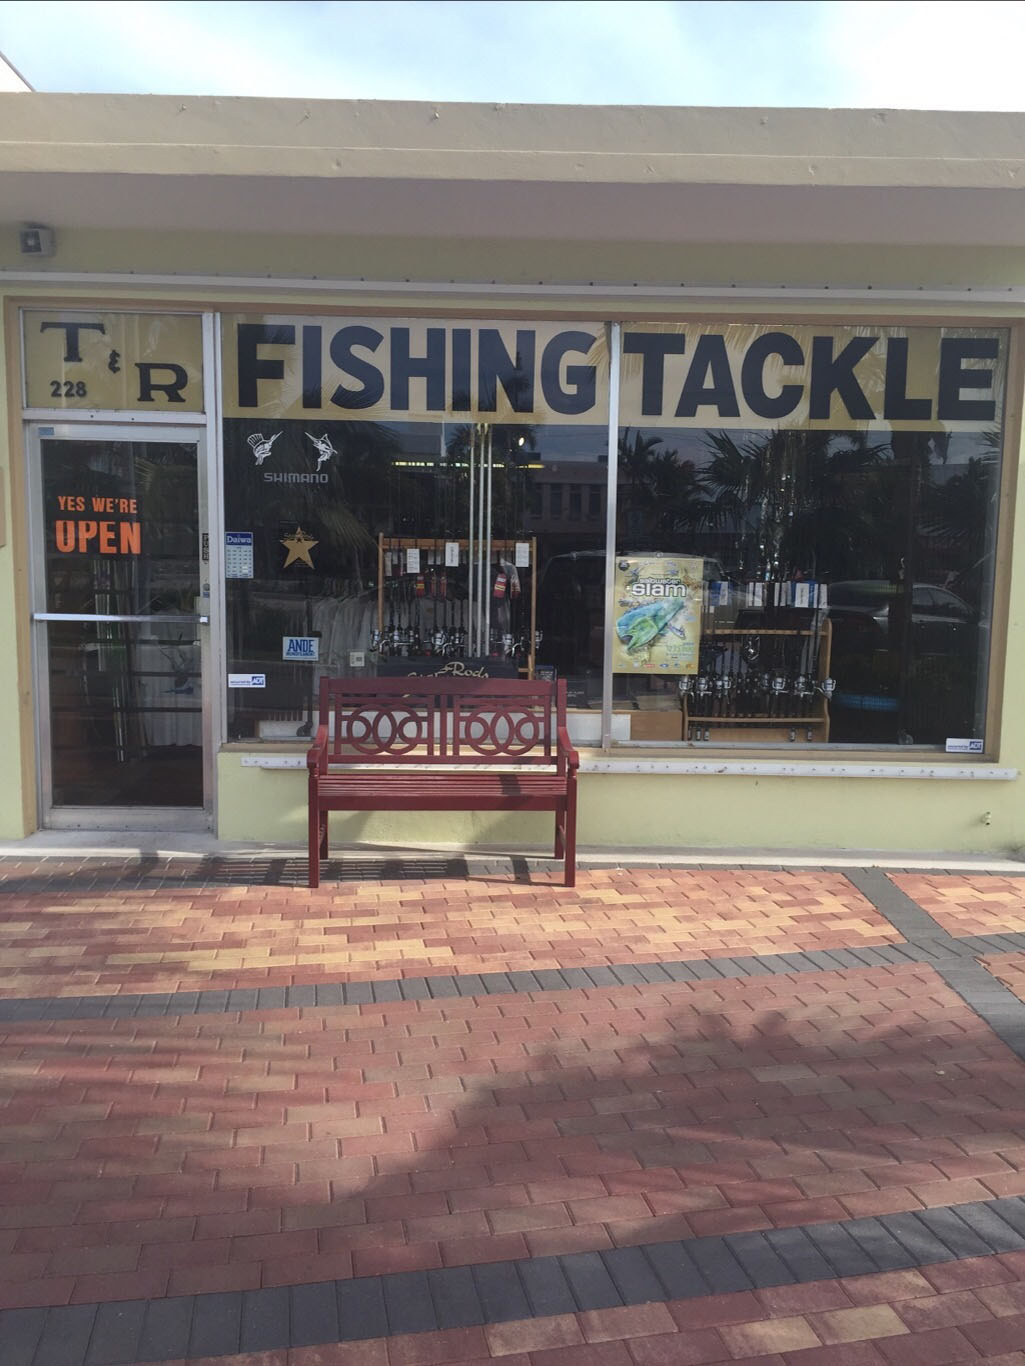 T And R Tackle Shop 228 Commercial Blvd, Lauderdale By The Sea, FL 33308 